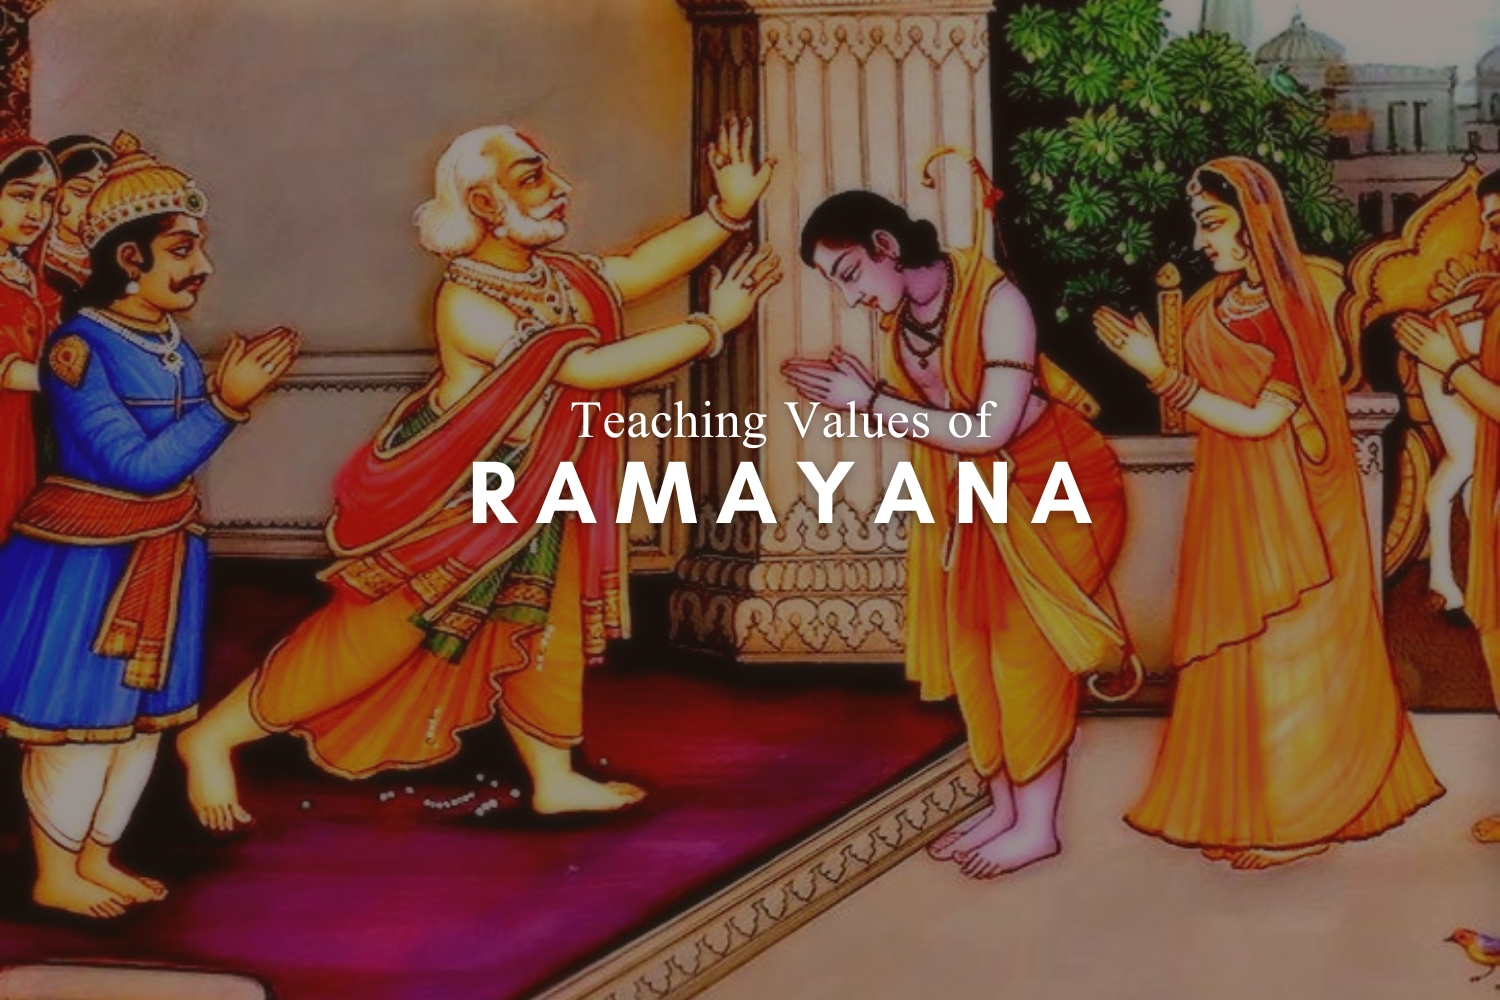 Relevance of Ramayana in modern times